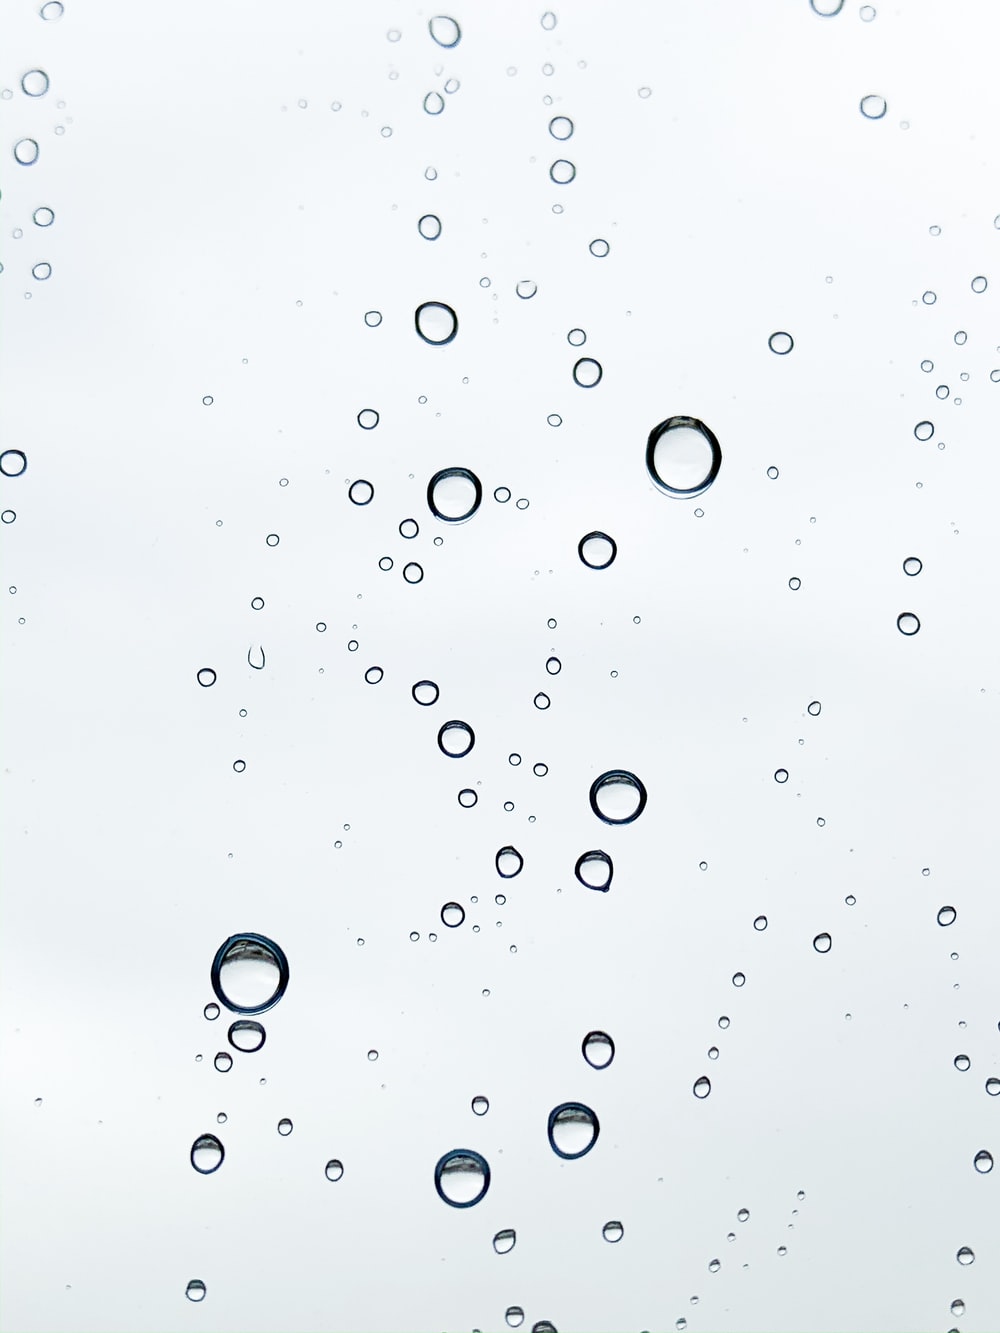 23+] Bubbles Black and White Wallpapers - WallpaperSafari